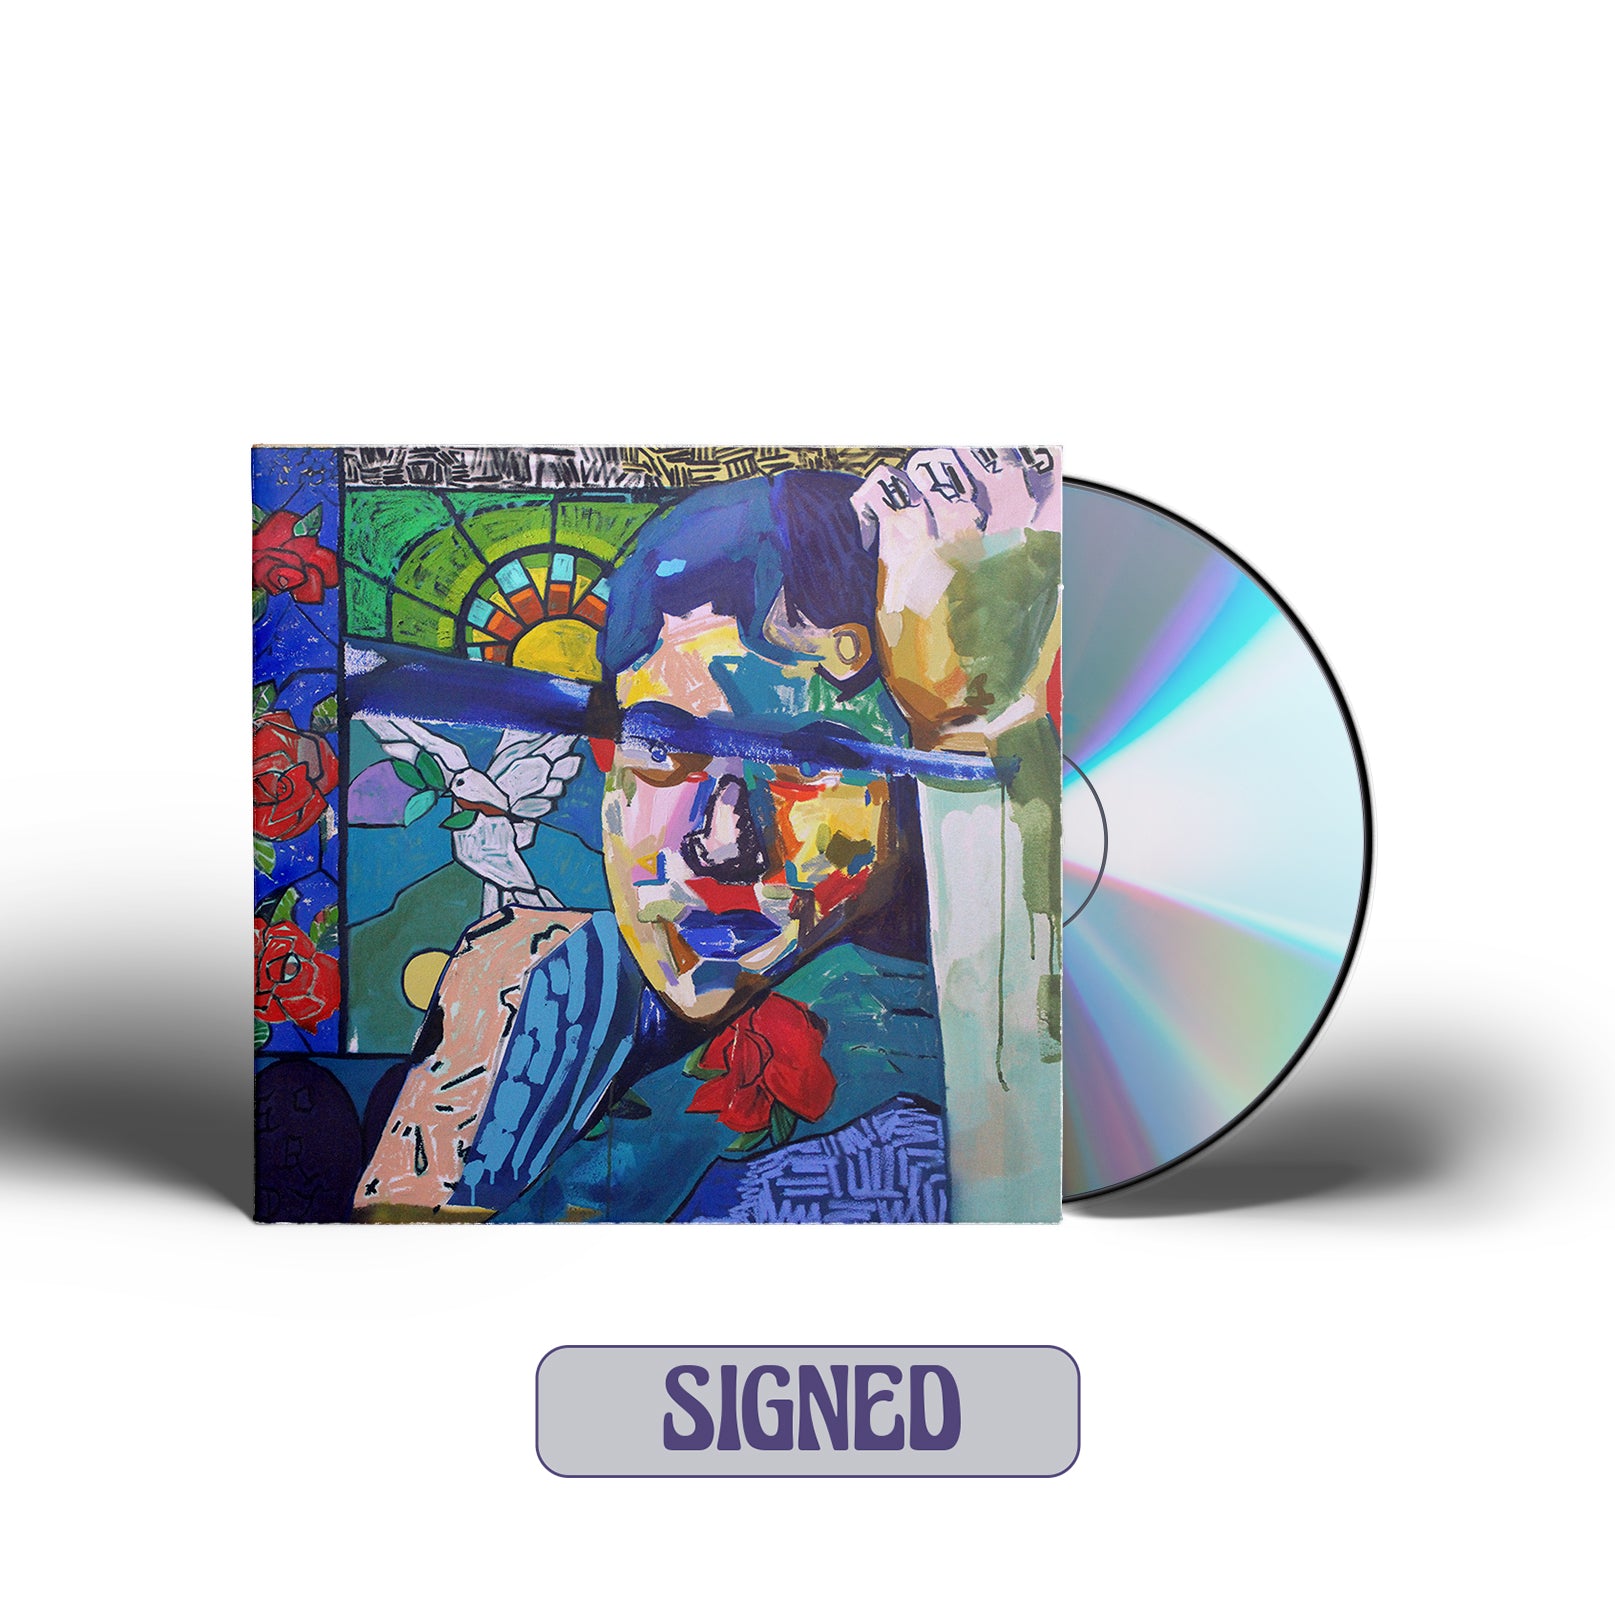 Susto - My Entire Life [SIGNED CD]